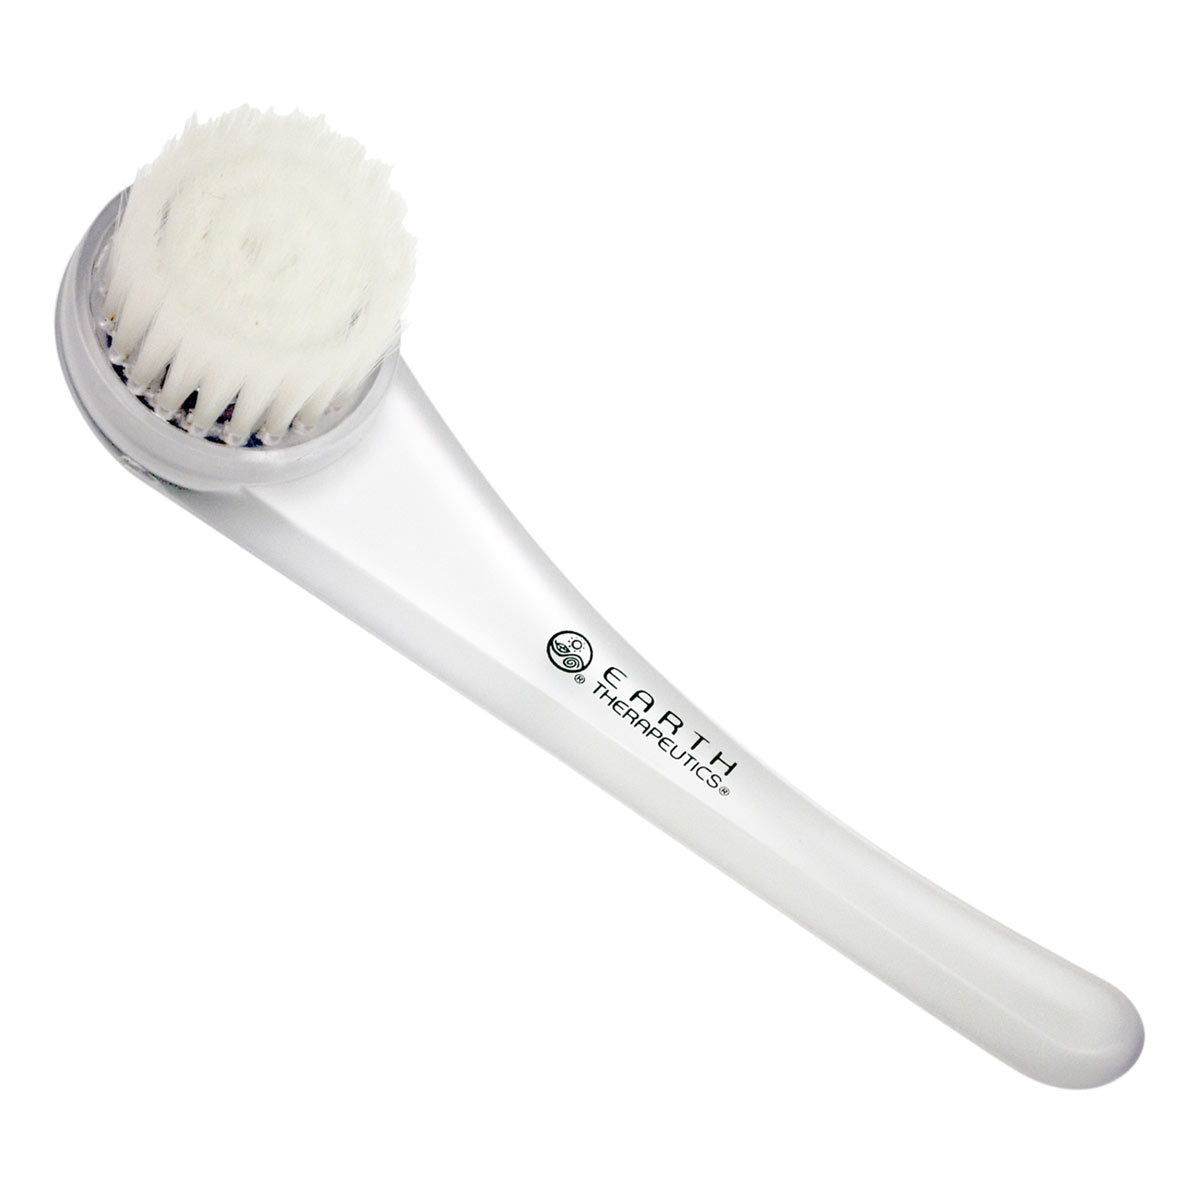 Primary image of Complexion Brush